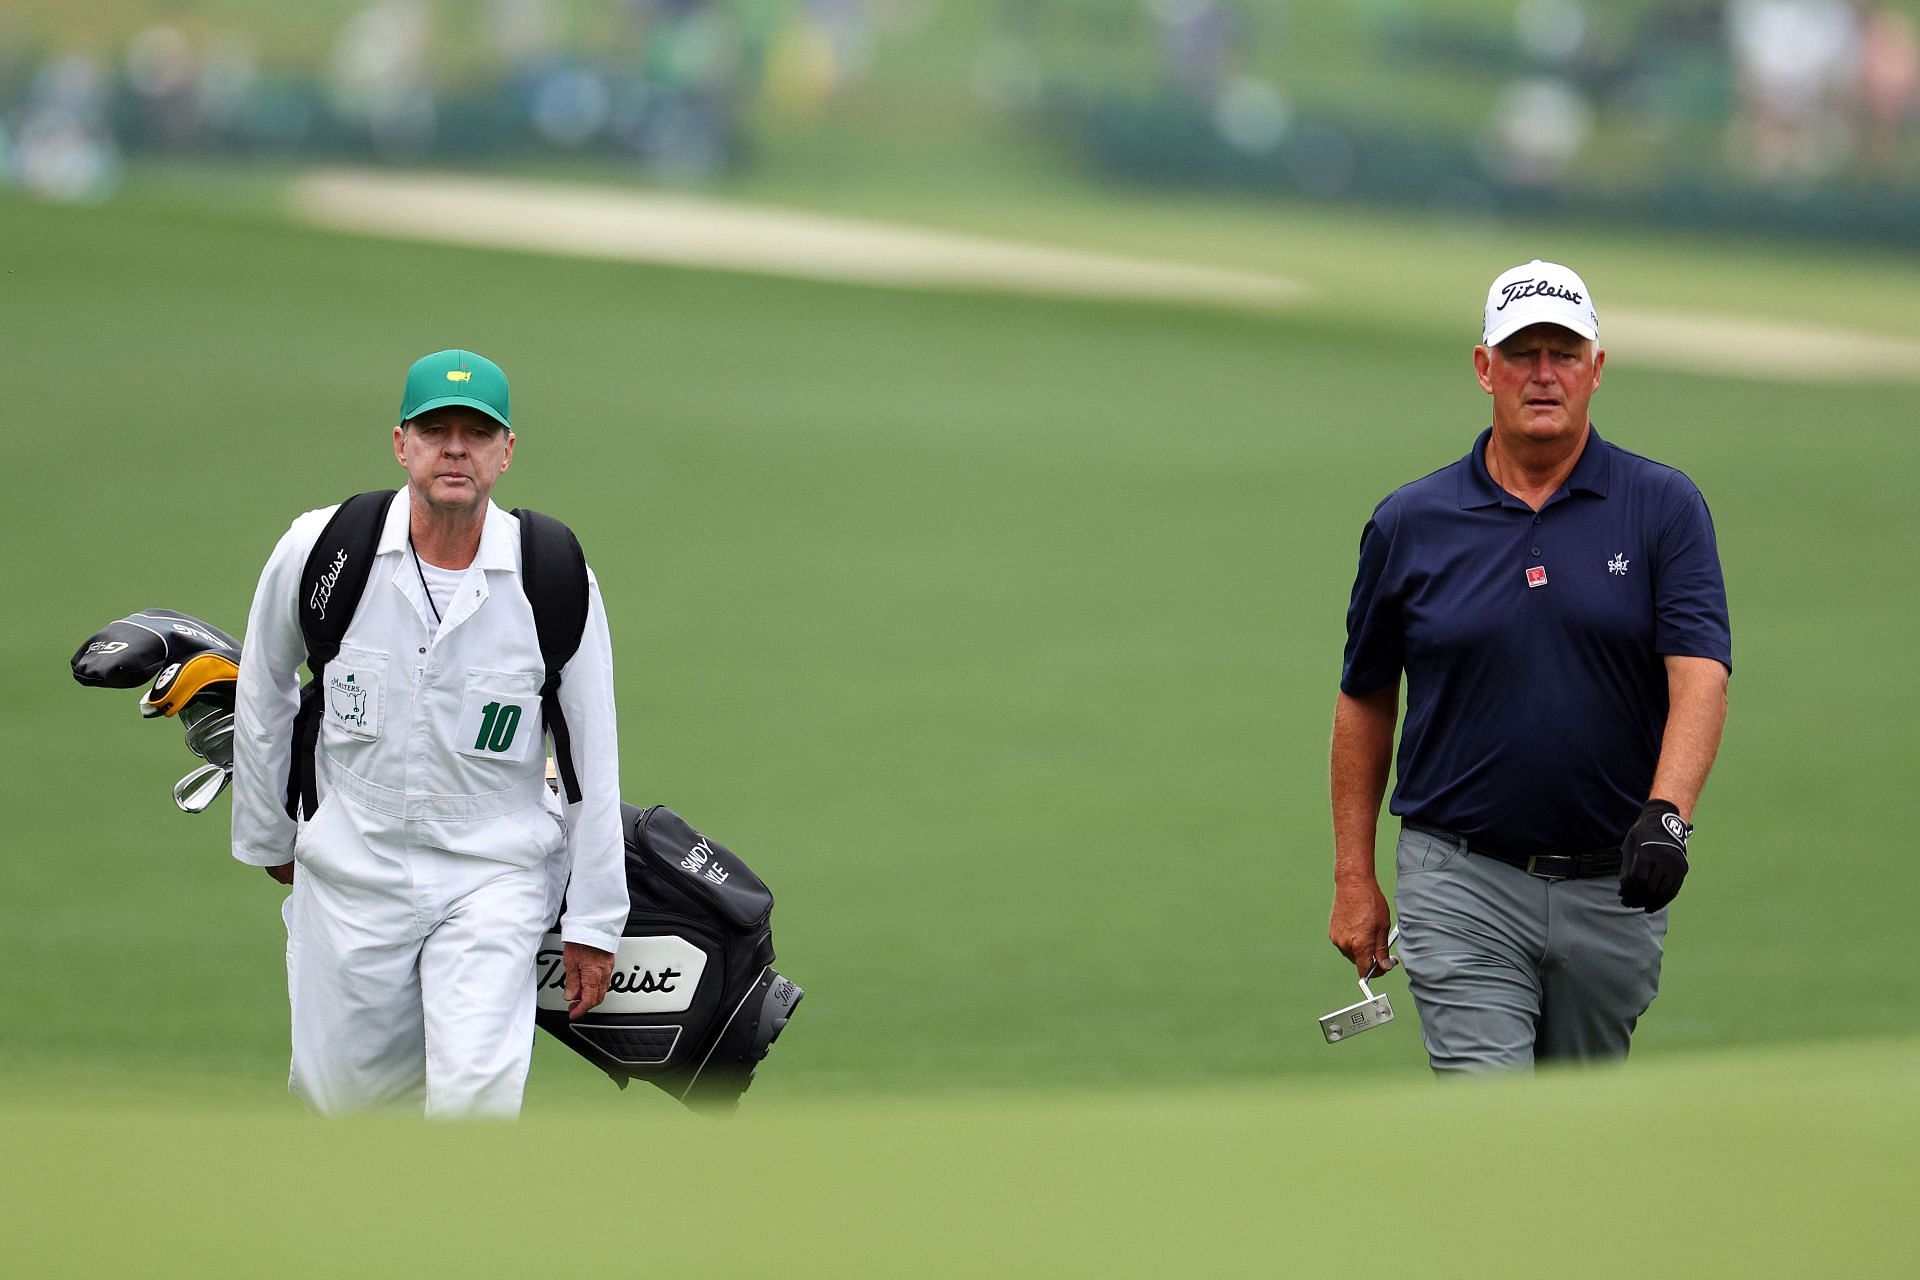 Sandy Lyle, still from the Masters - Round One (Image via Getty)